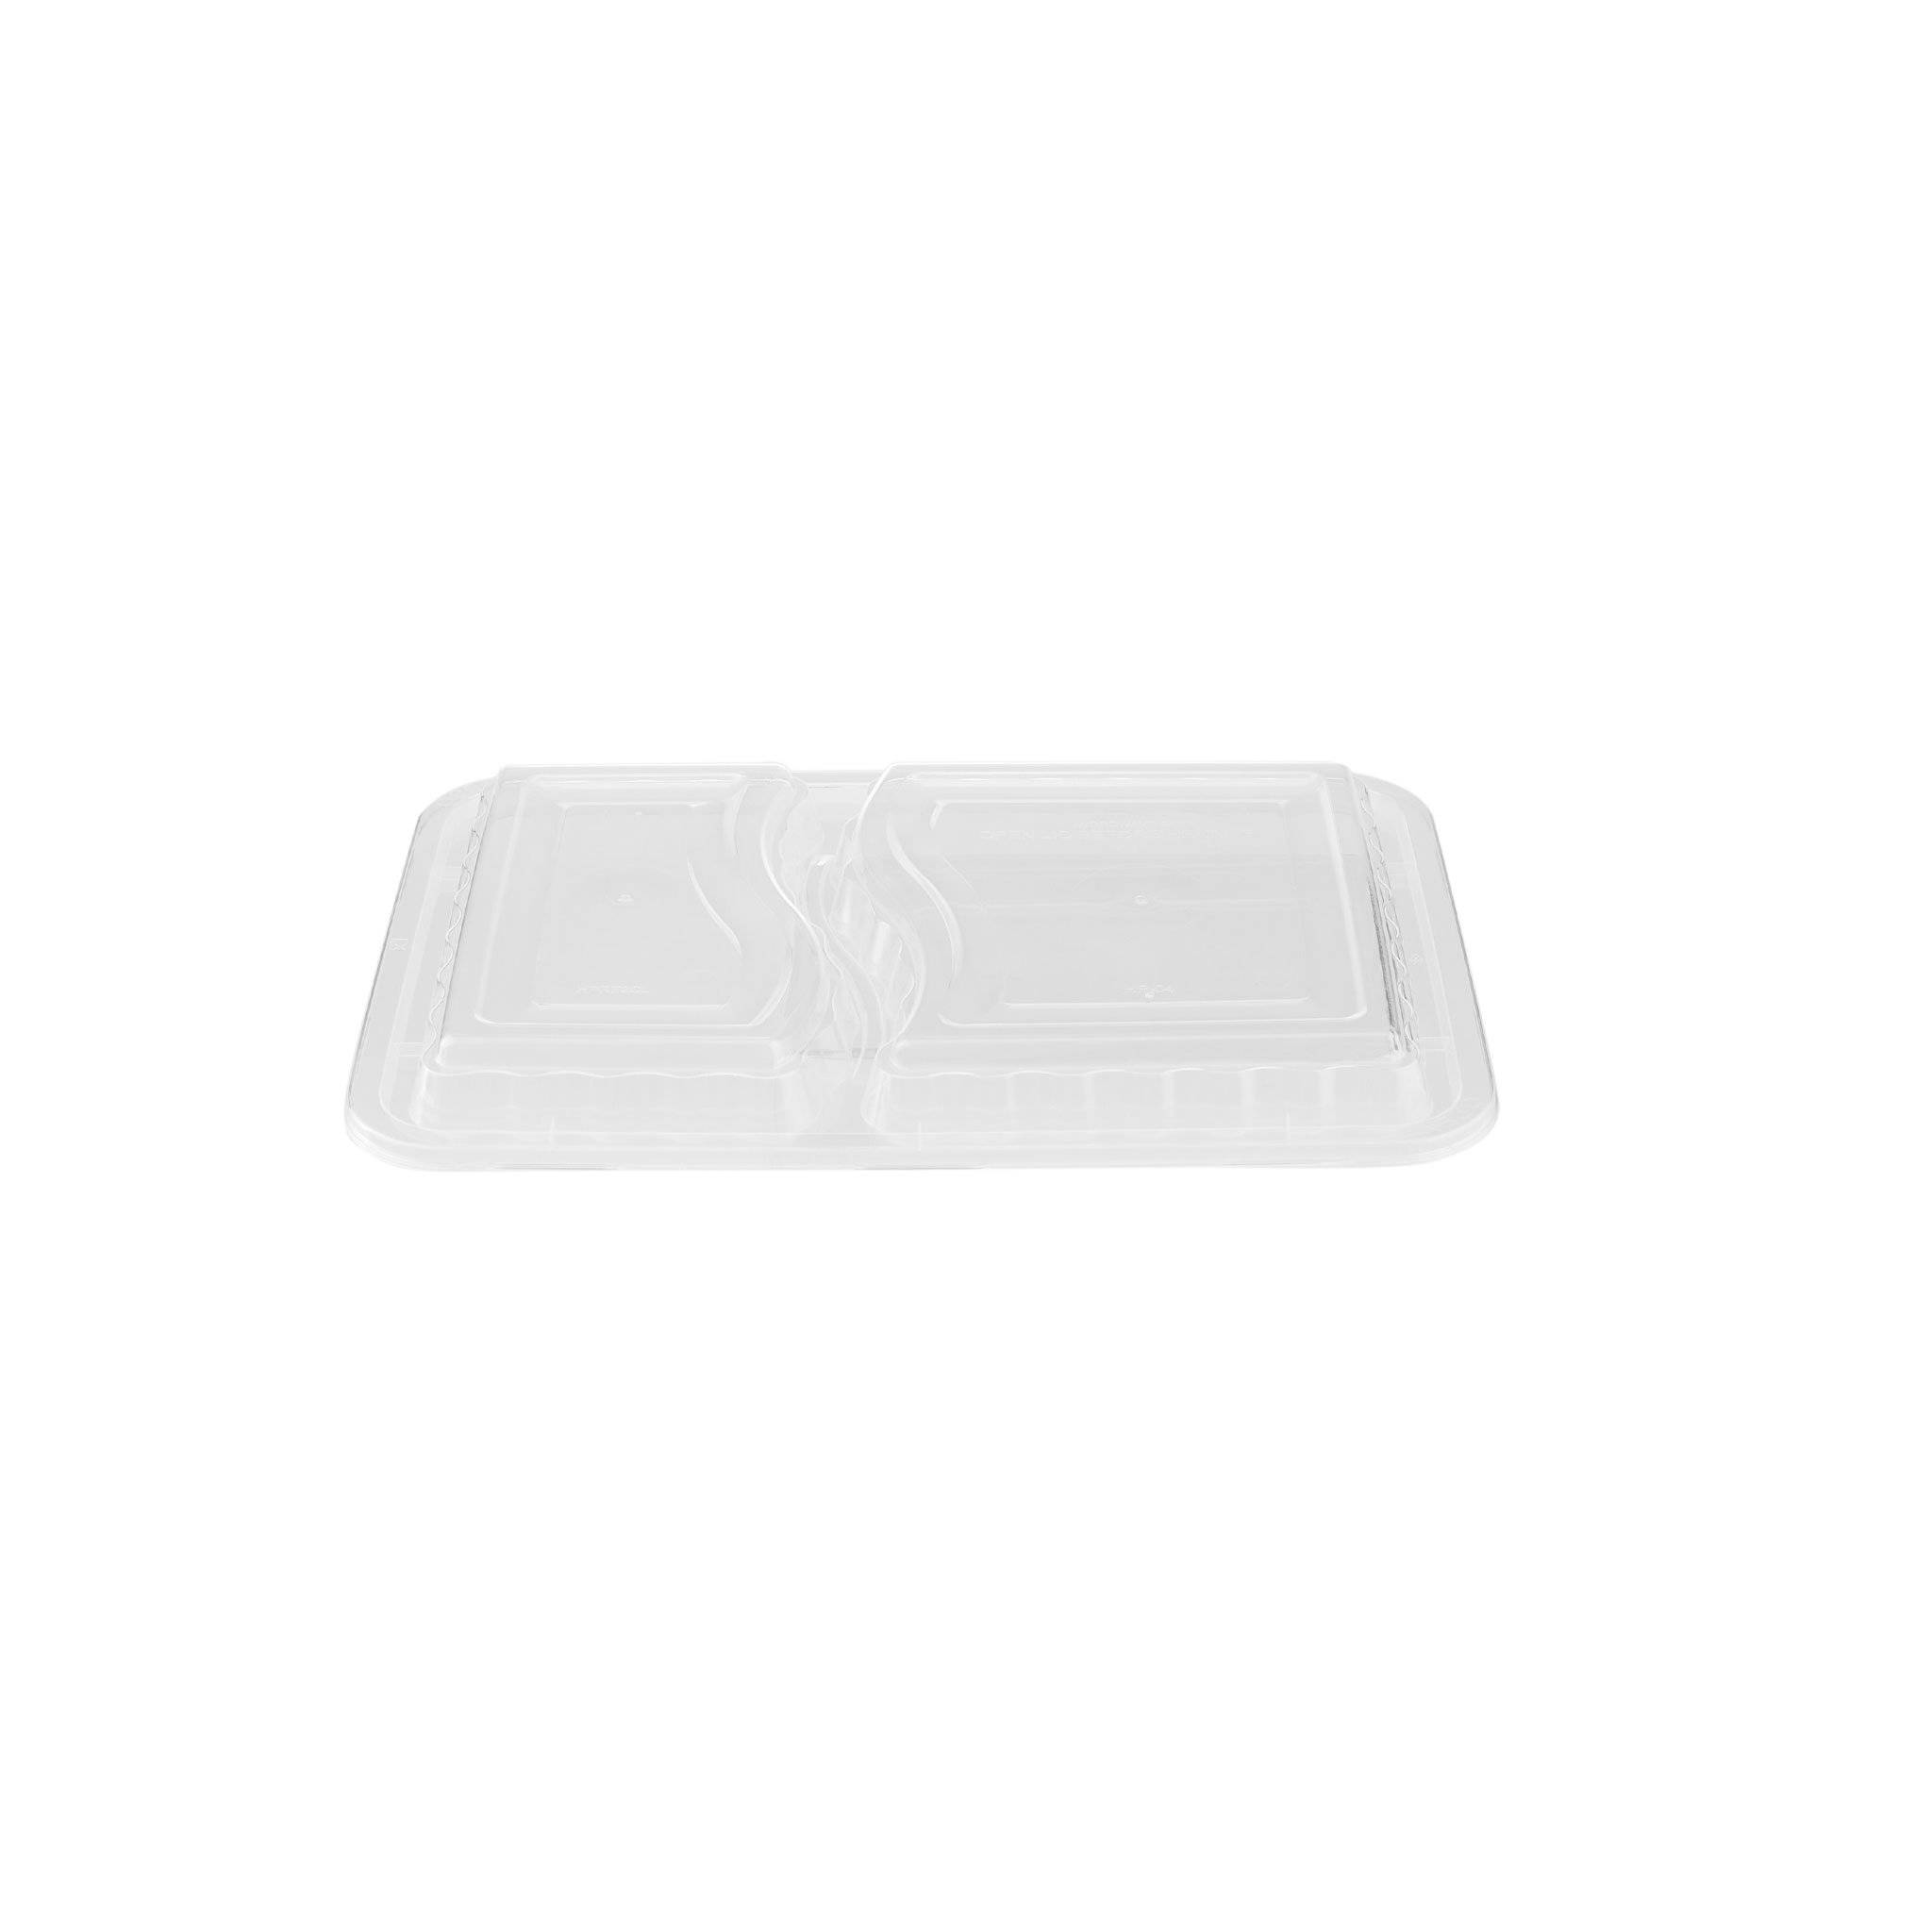 Black Base Rectangular Container 2 Compartments 300 Pieces - Hotpack Global